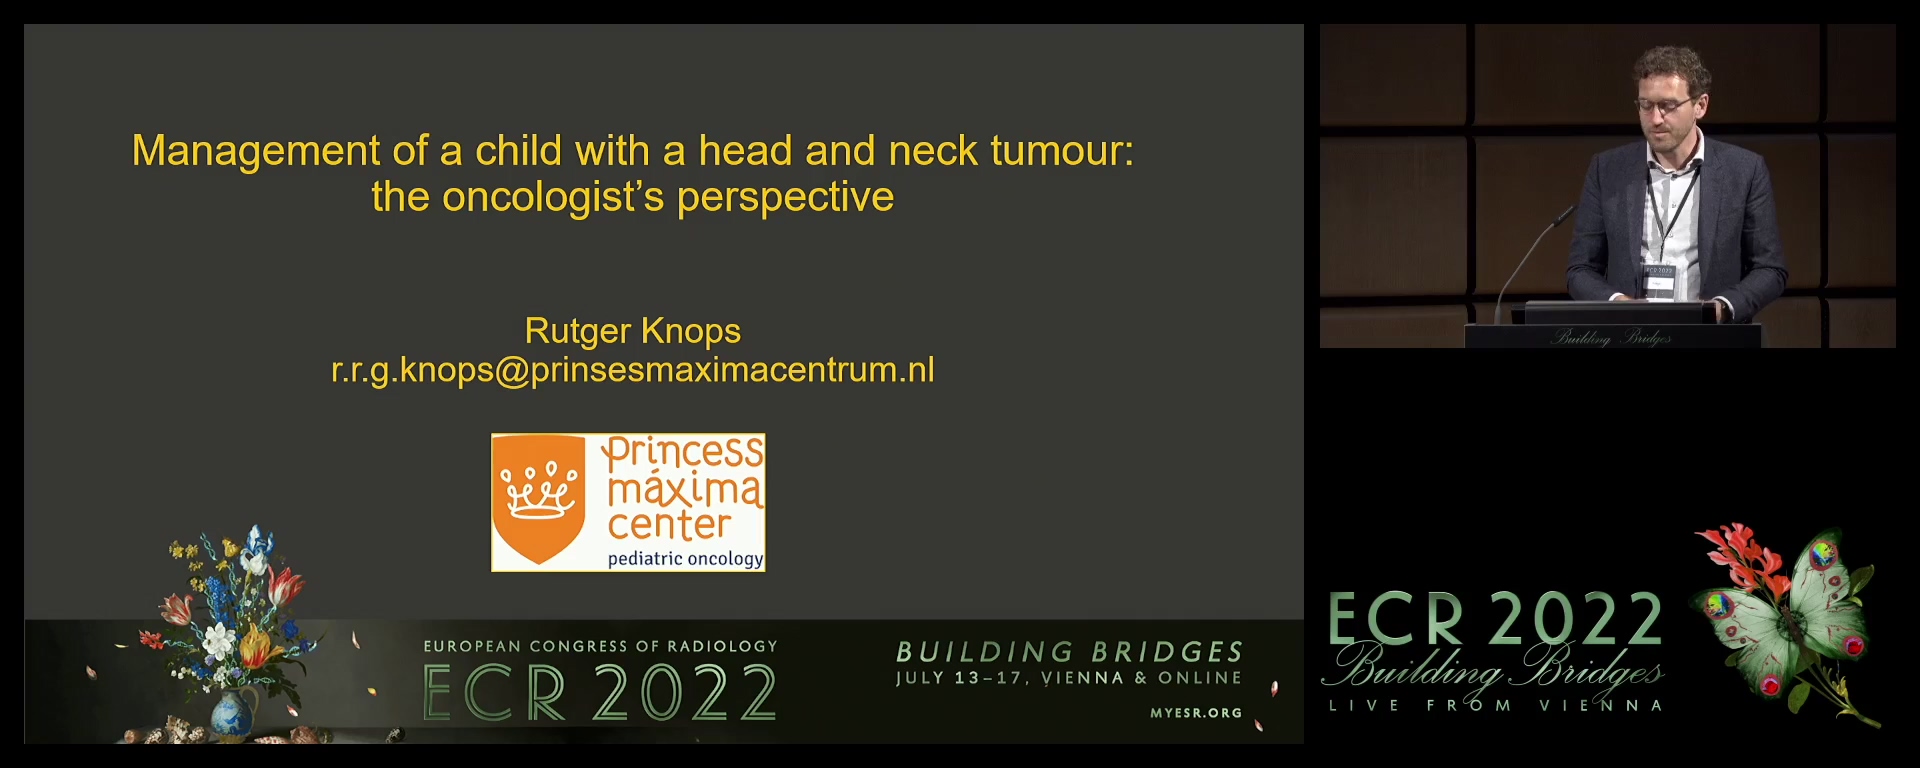 Management of a child with a head and neck tumour: the oncologist's perspective